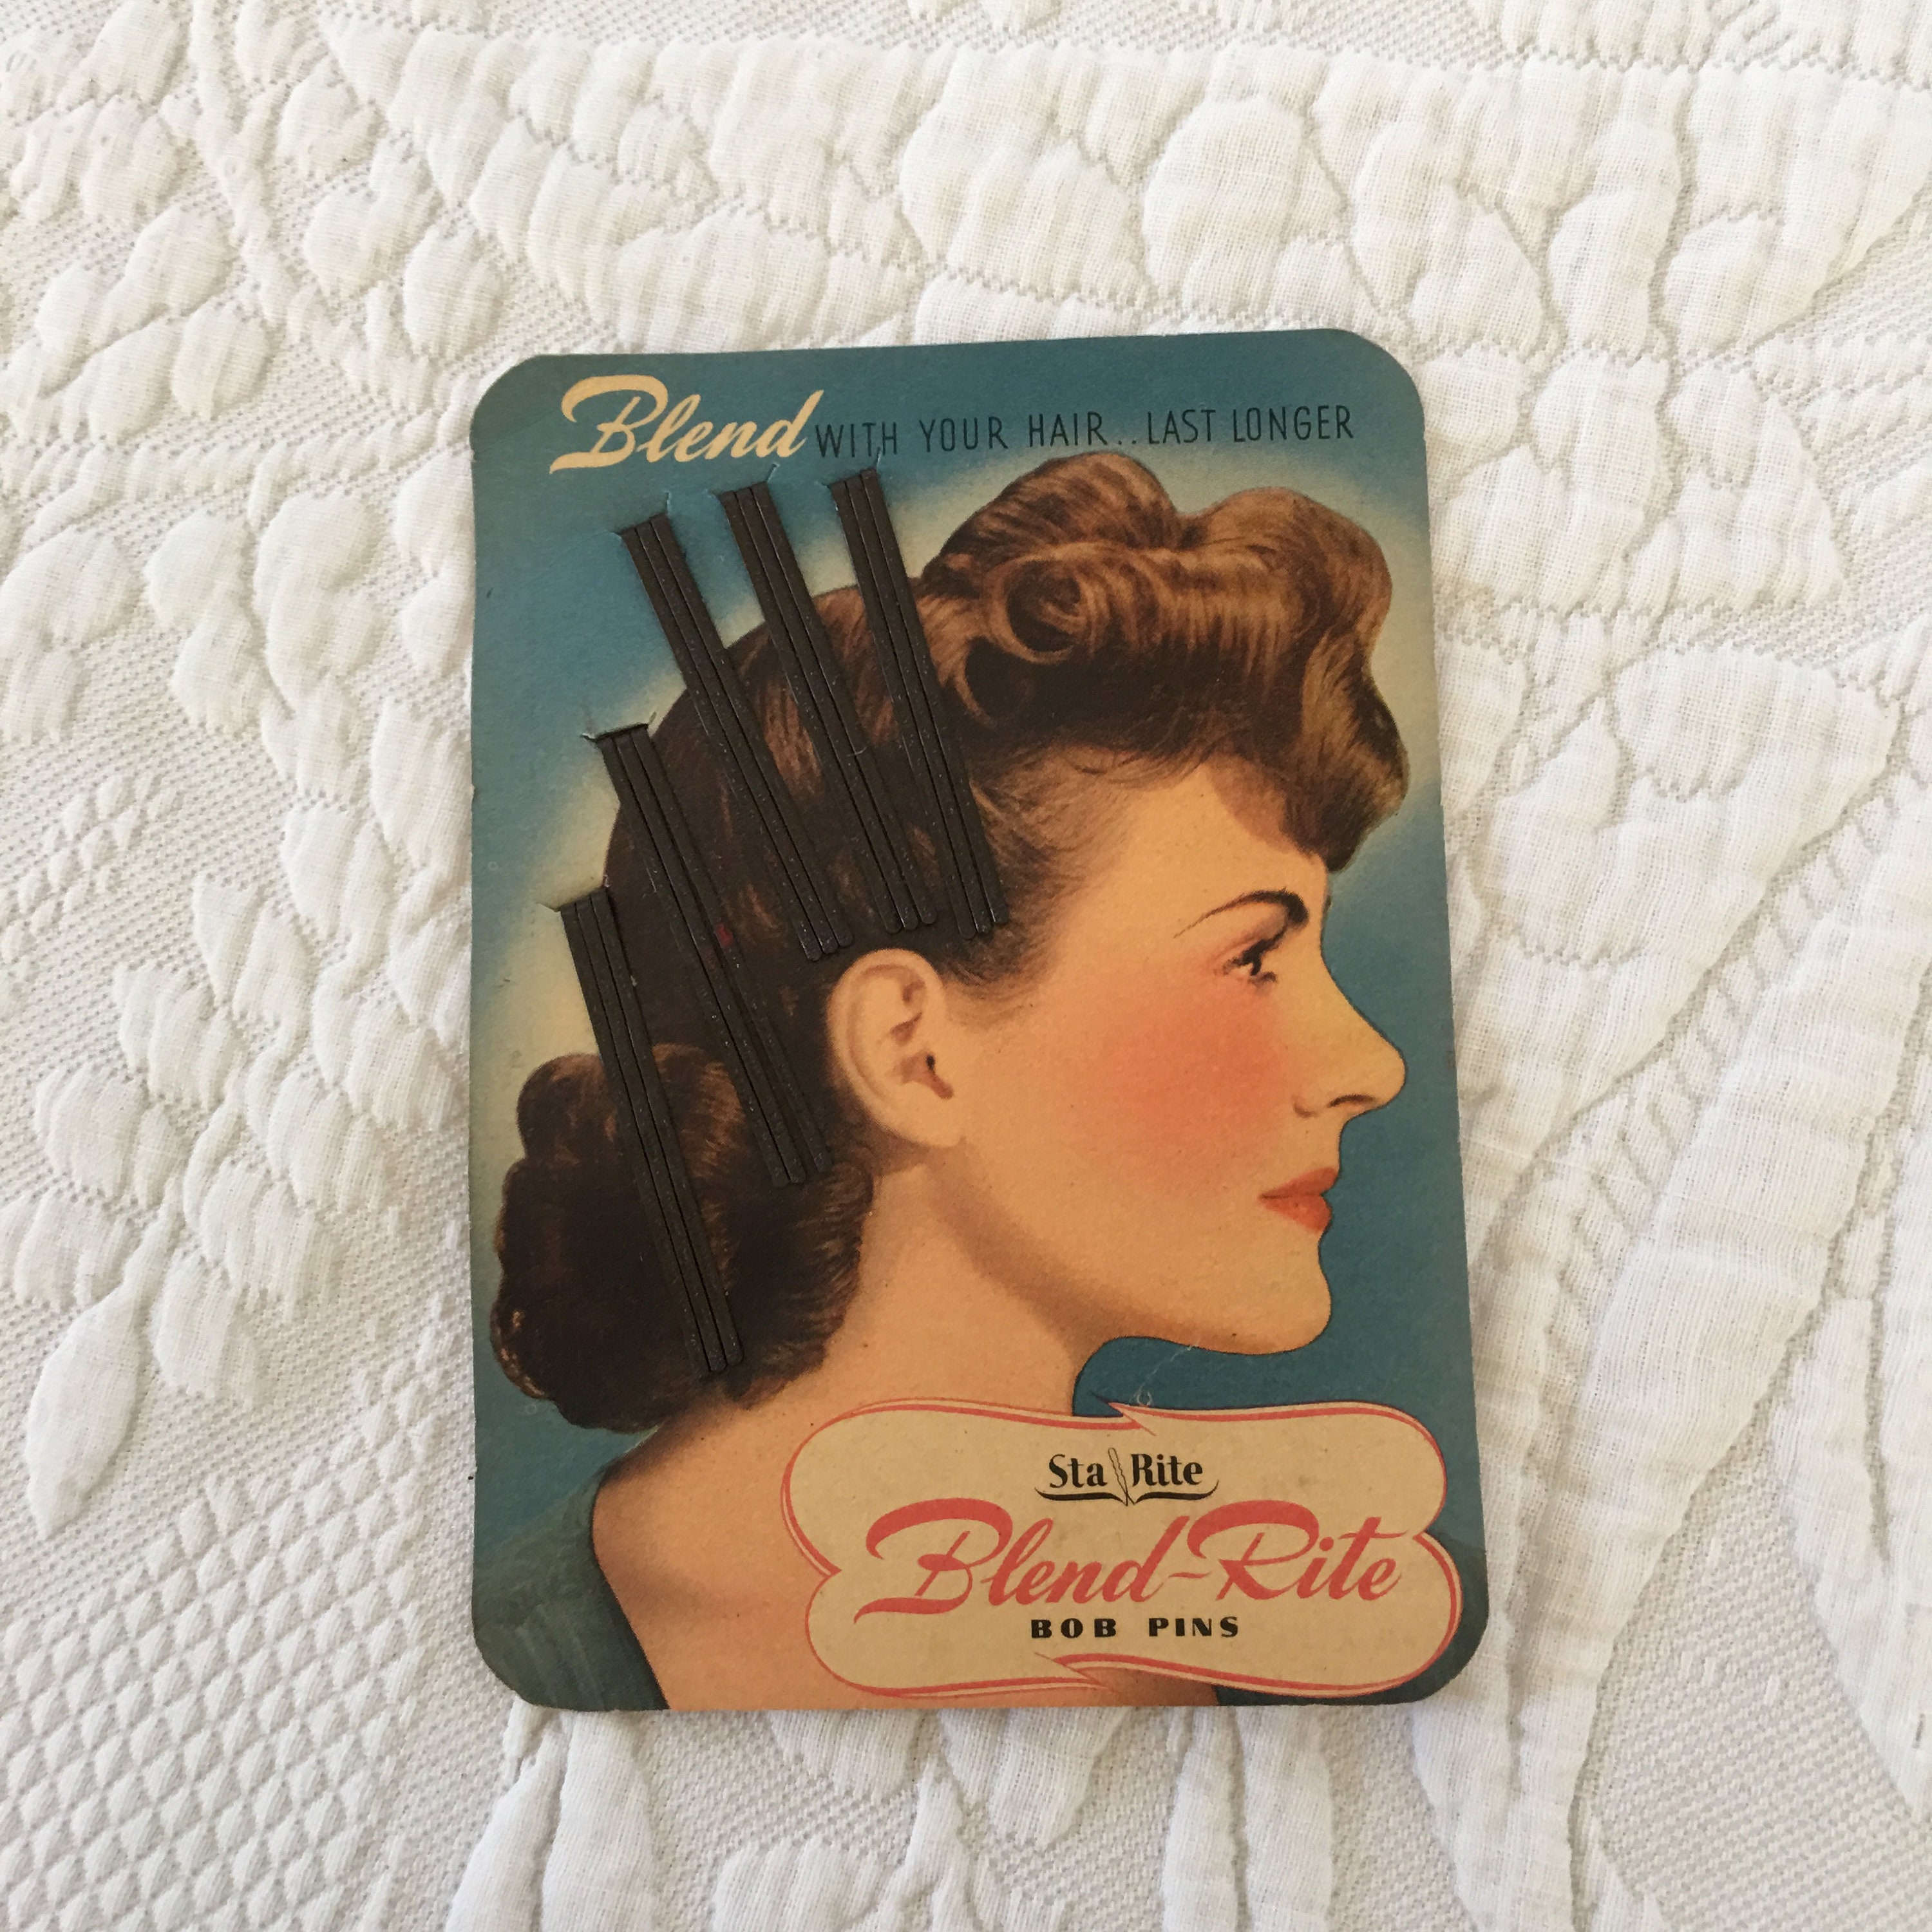 Vintage Sta Rite Blend-Rite Bob Pins From 1940S. No Shine, Glare Bobby Pins. Ginnie-Lou Inc. Shelbyville, Ill. Great Dresser Accent Card